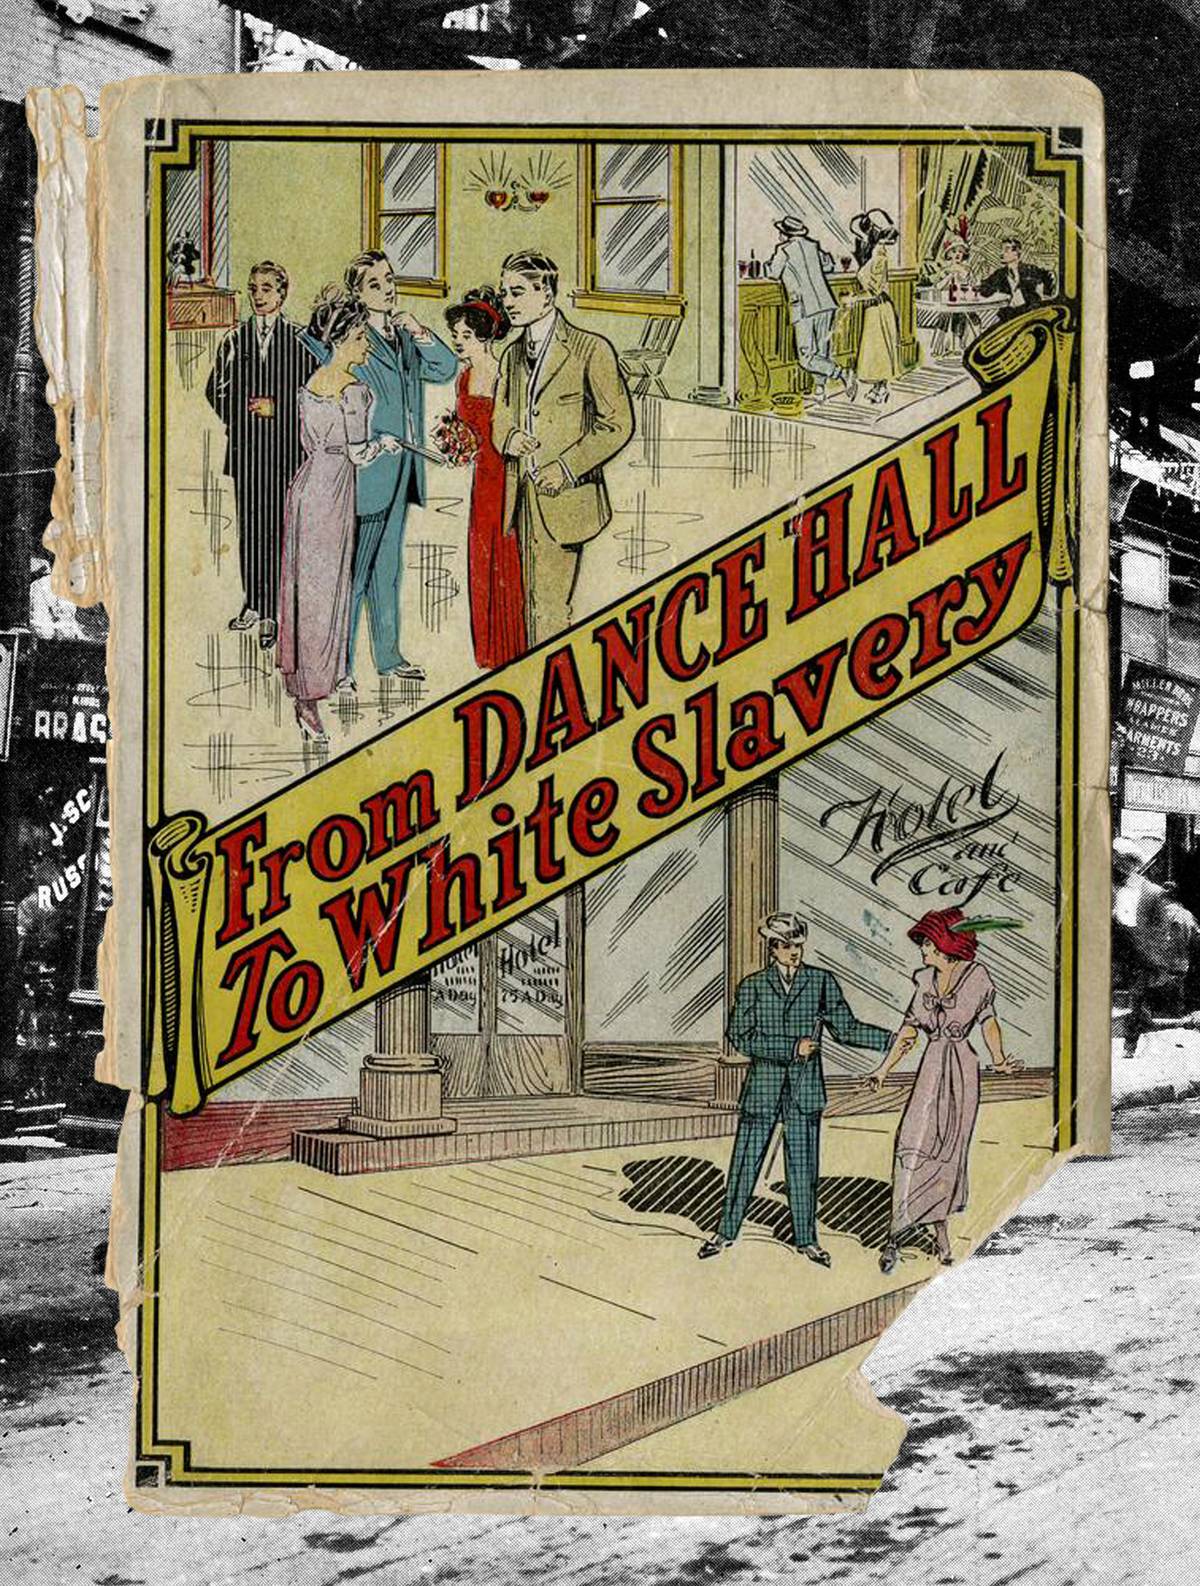 The cover of ‘From Dance Hall to White Slavery,’ by John Dillon. This 1913 book told ‘ten dance hall tragedies,’ cautionary tales about women led to prostitution.